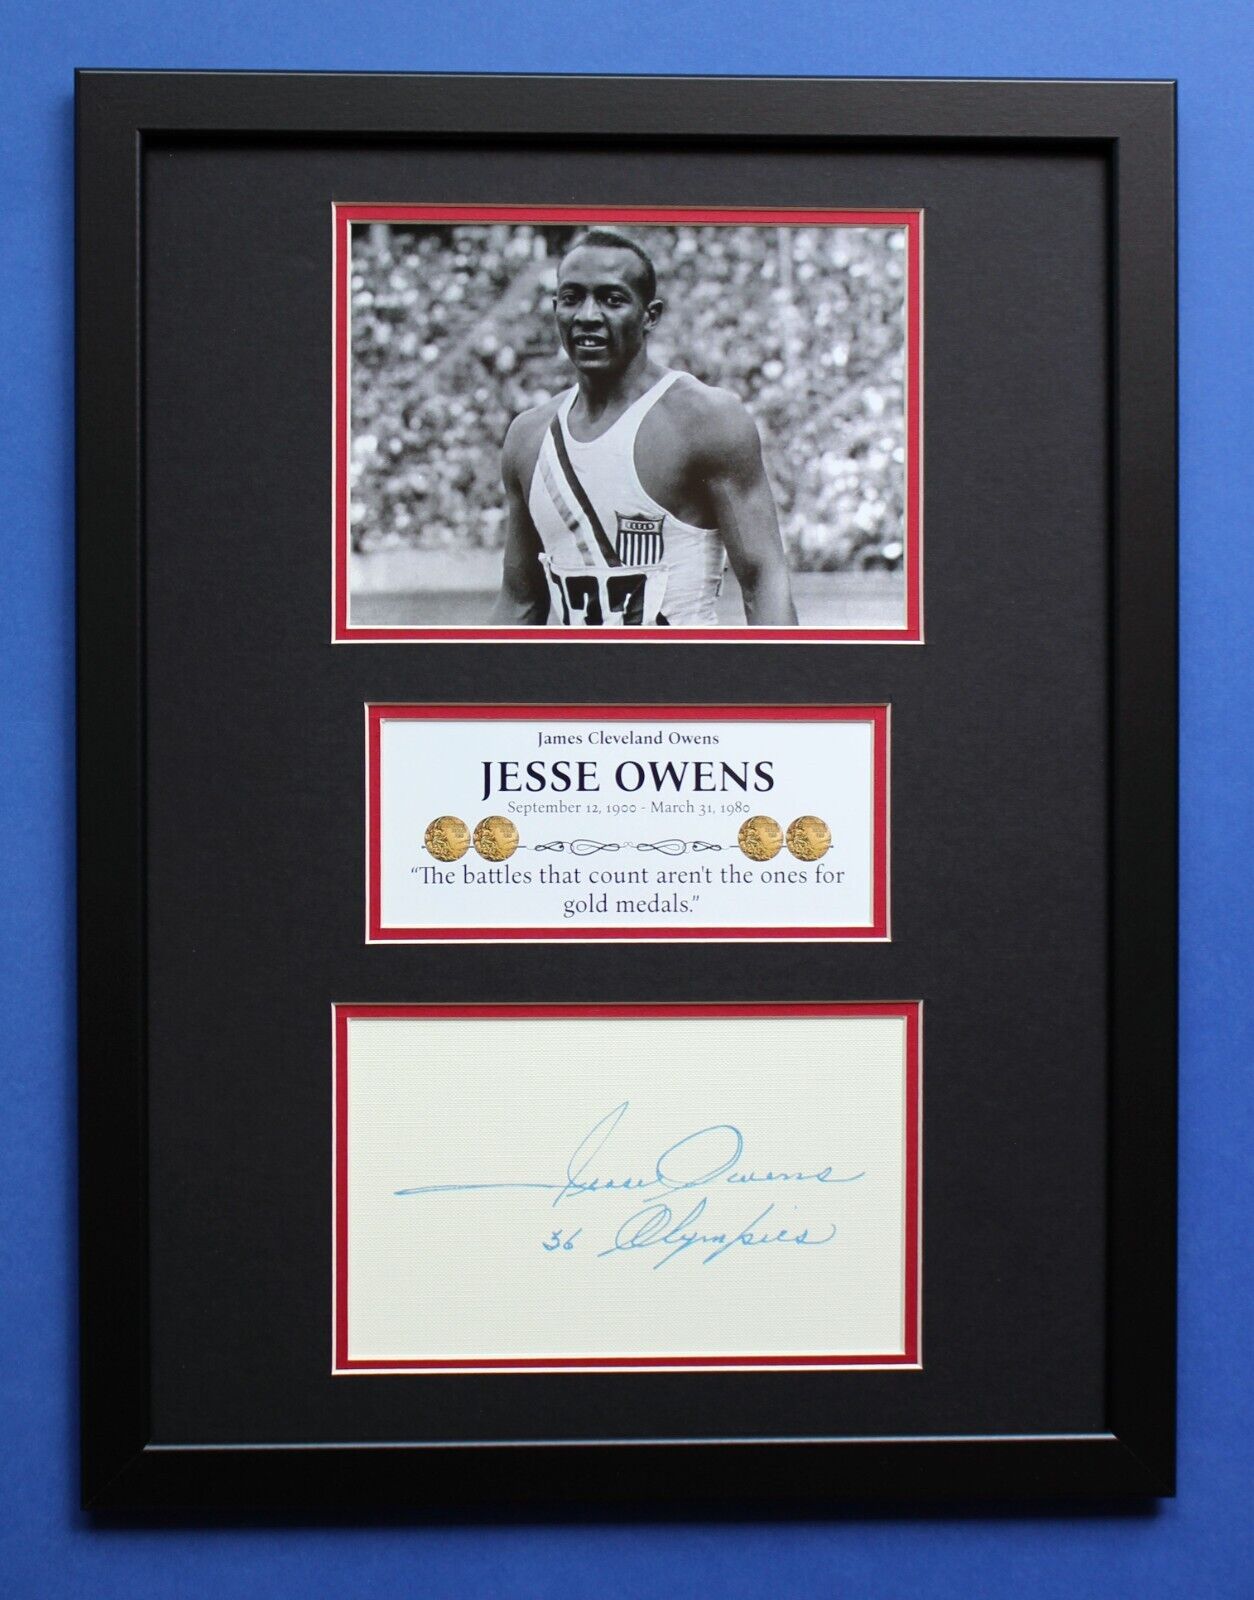 JESSE OWENS AUTOGRAPH framed artistic display Four Gold Medals 1936 Berlin